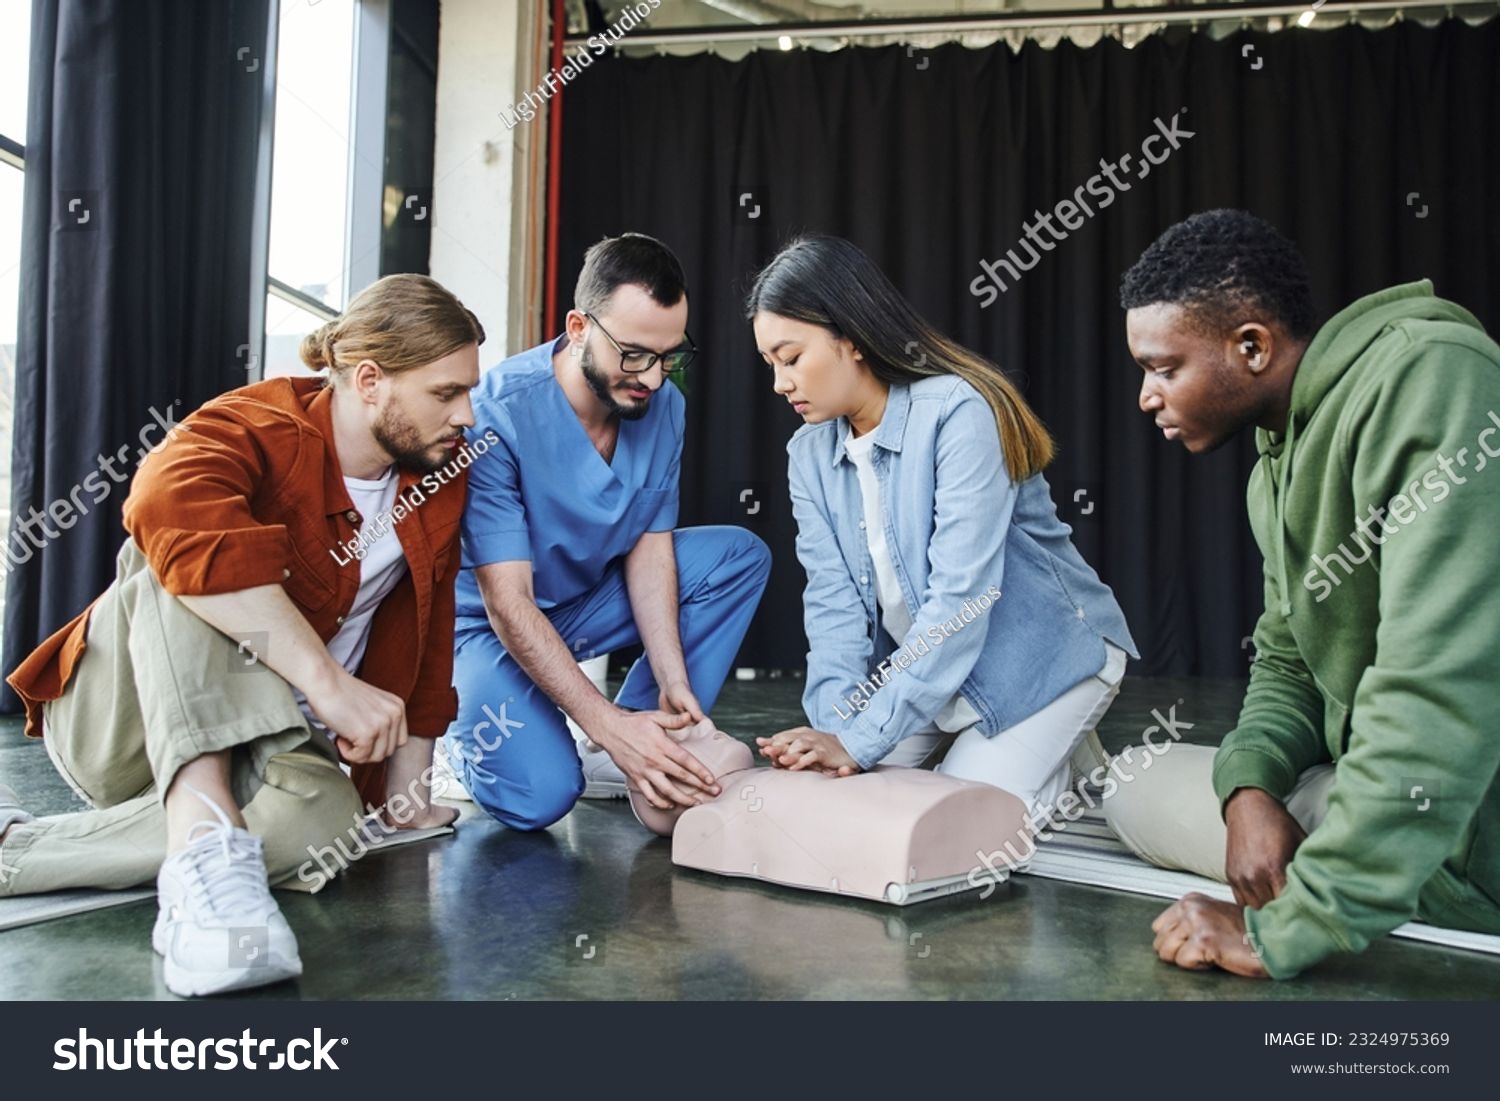 medical seminar, first aid training, cardiopulmonary resuscitation, healthcare worker assisting asian woman practicing chest compressions on CPR manikin near multicultural participants #2324975369